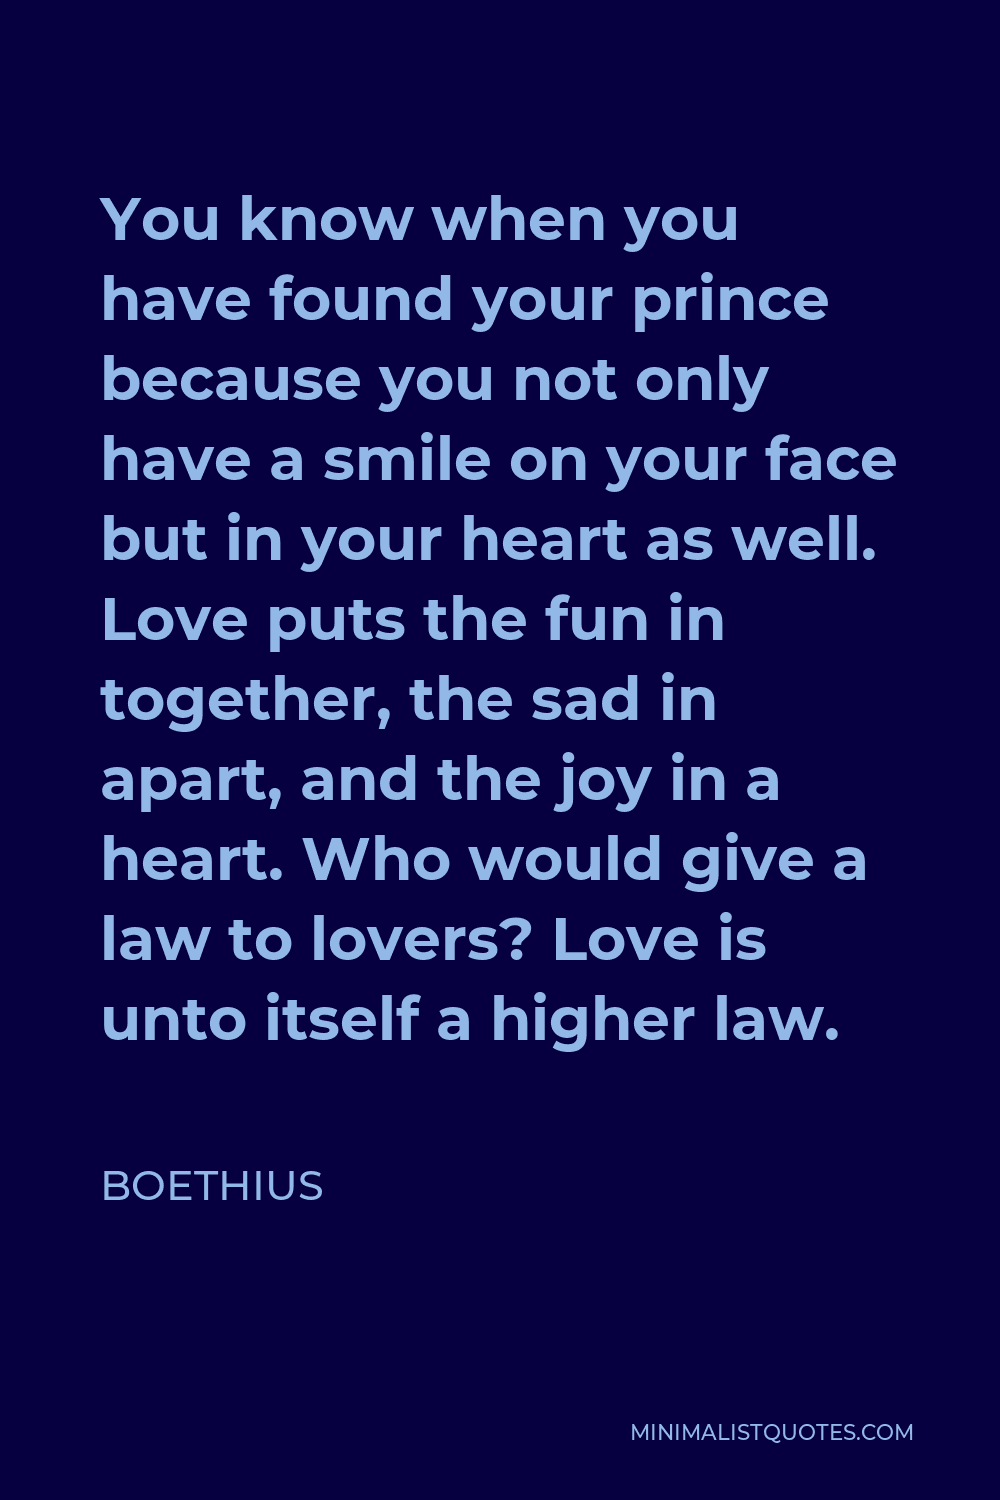 Boethius Quote - You know when you have found your prince because you not only have a smile on your face but in your heart as well. Love puts the fun in together, the sad in apart, and the joy in a heart. Who would give a law to lovers? Love is unto itself a higher law.